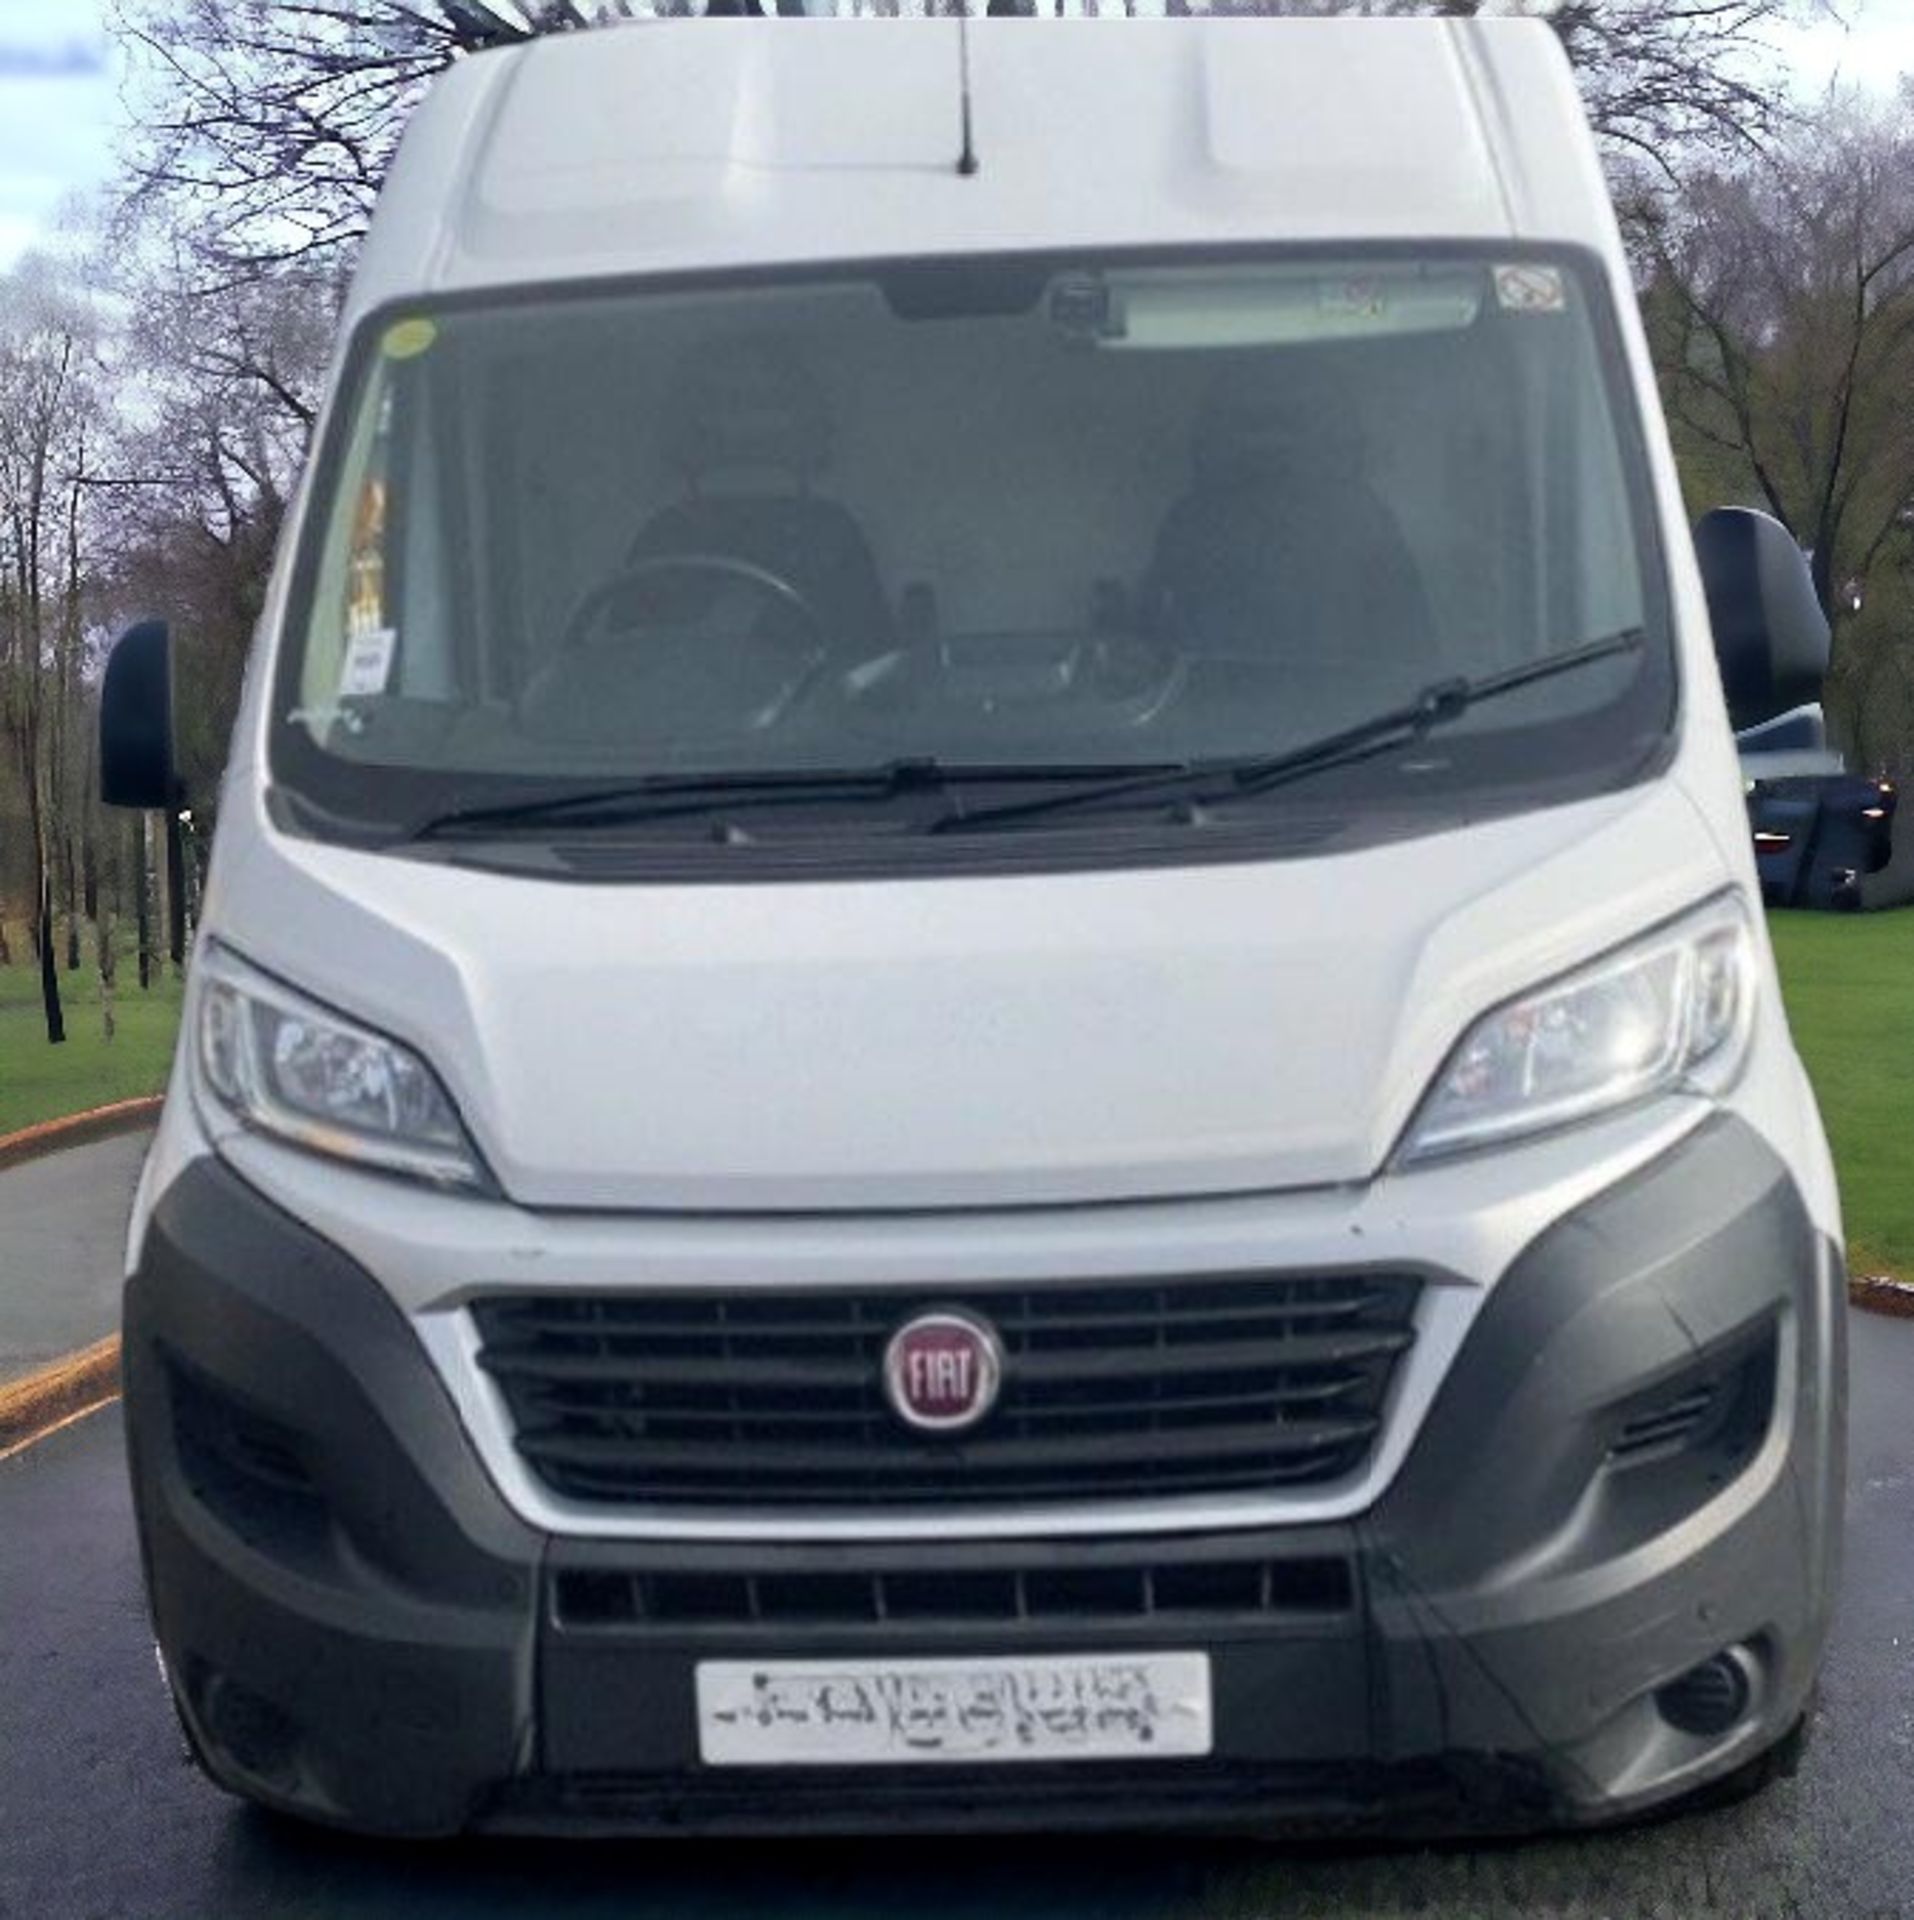 2019 FIAT DUCATO L2 MWB PANEL VAN - VERSATILE AND RELIABLE FOR YOUR BUSINESS NEEDS - Image 4 of 18